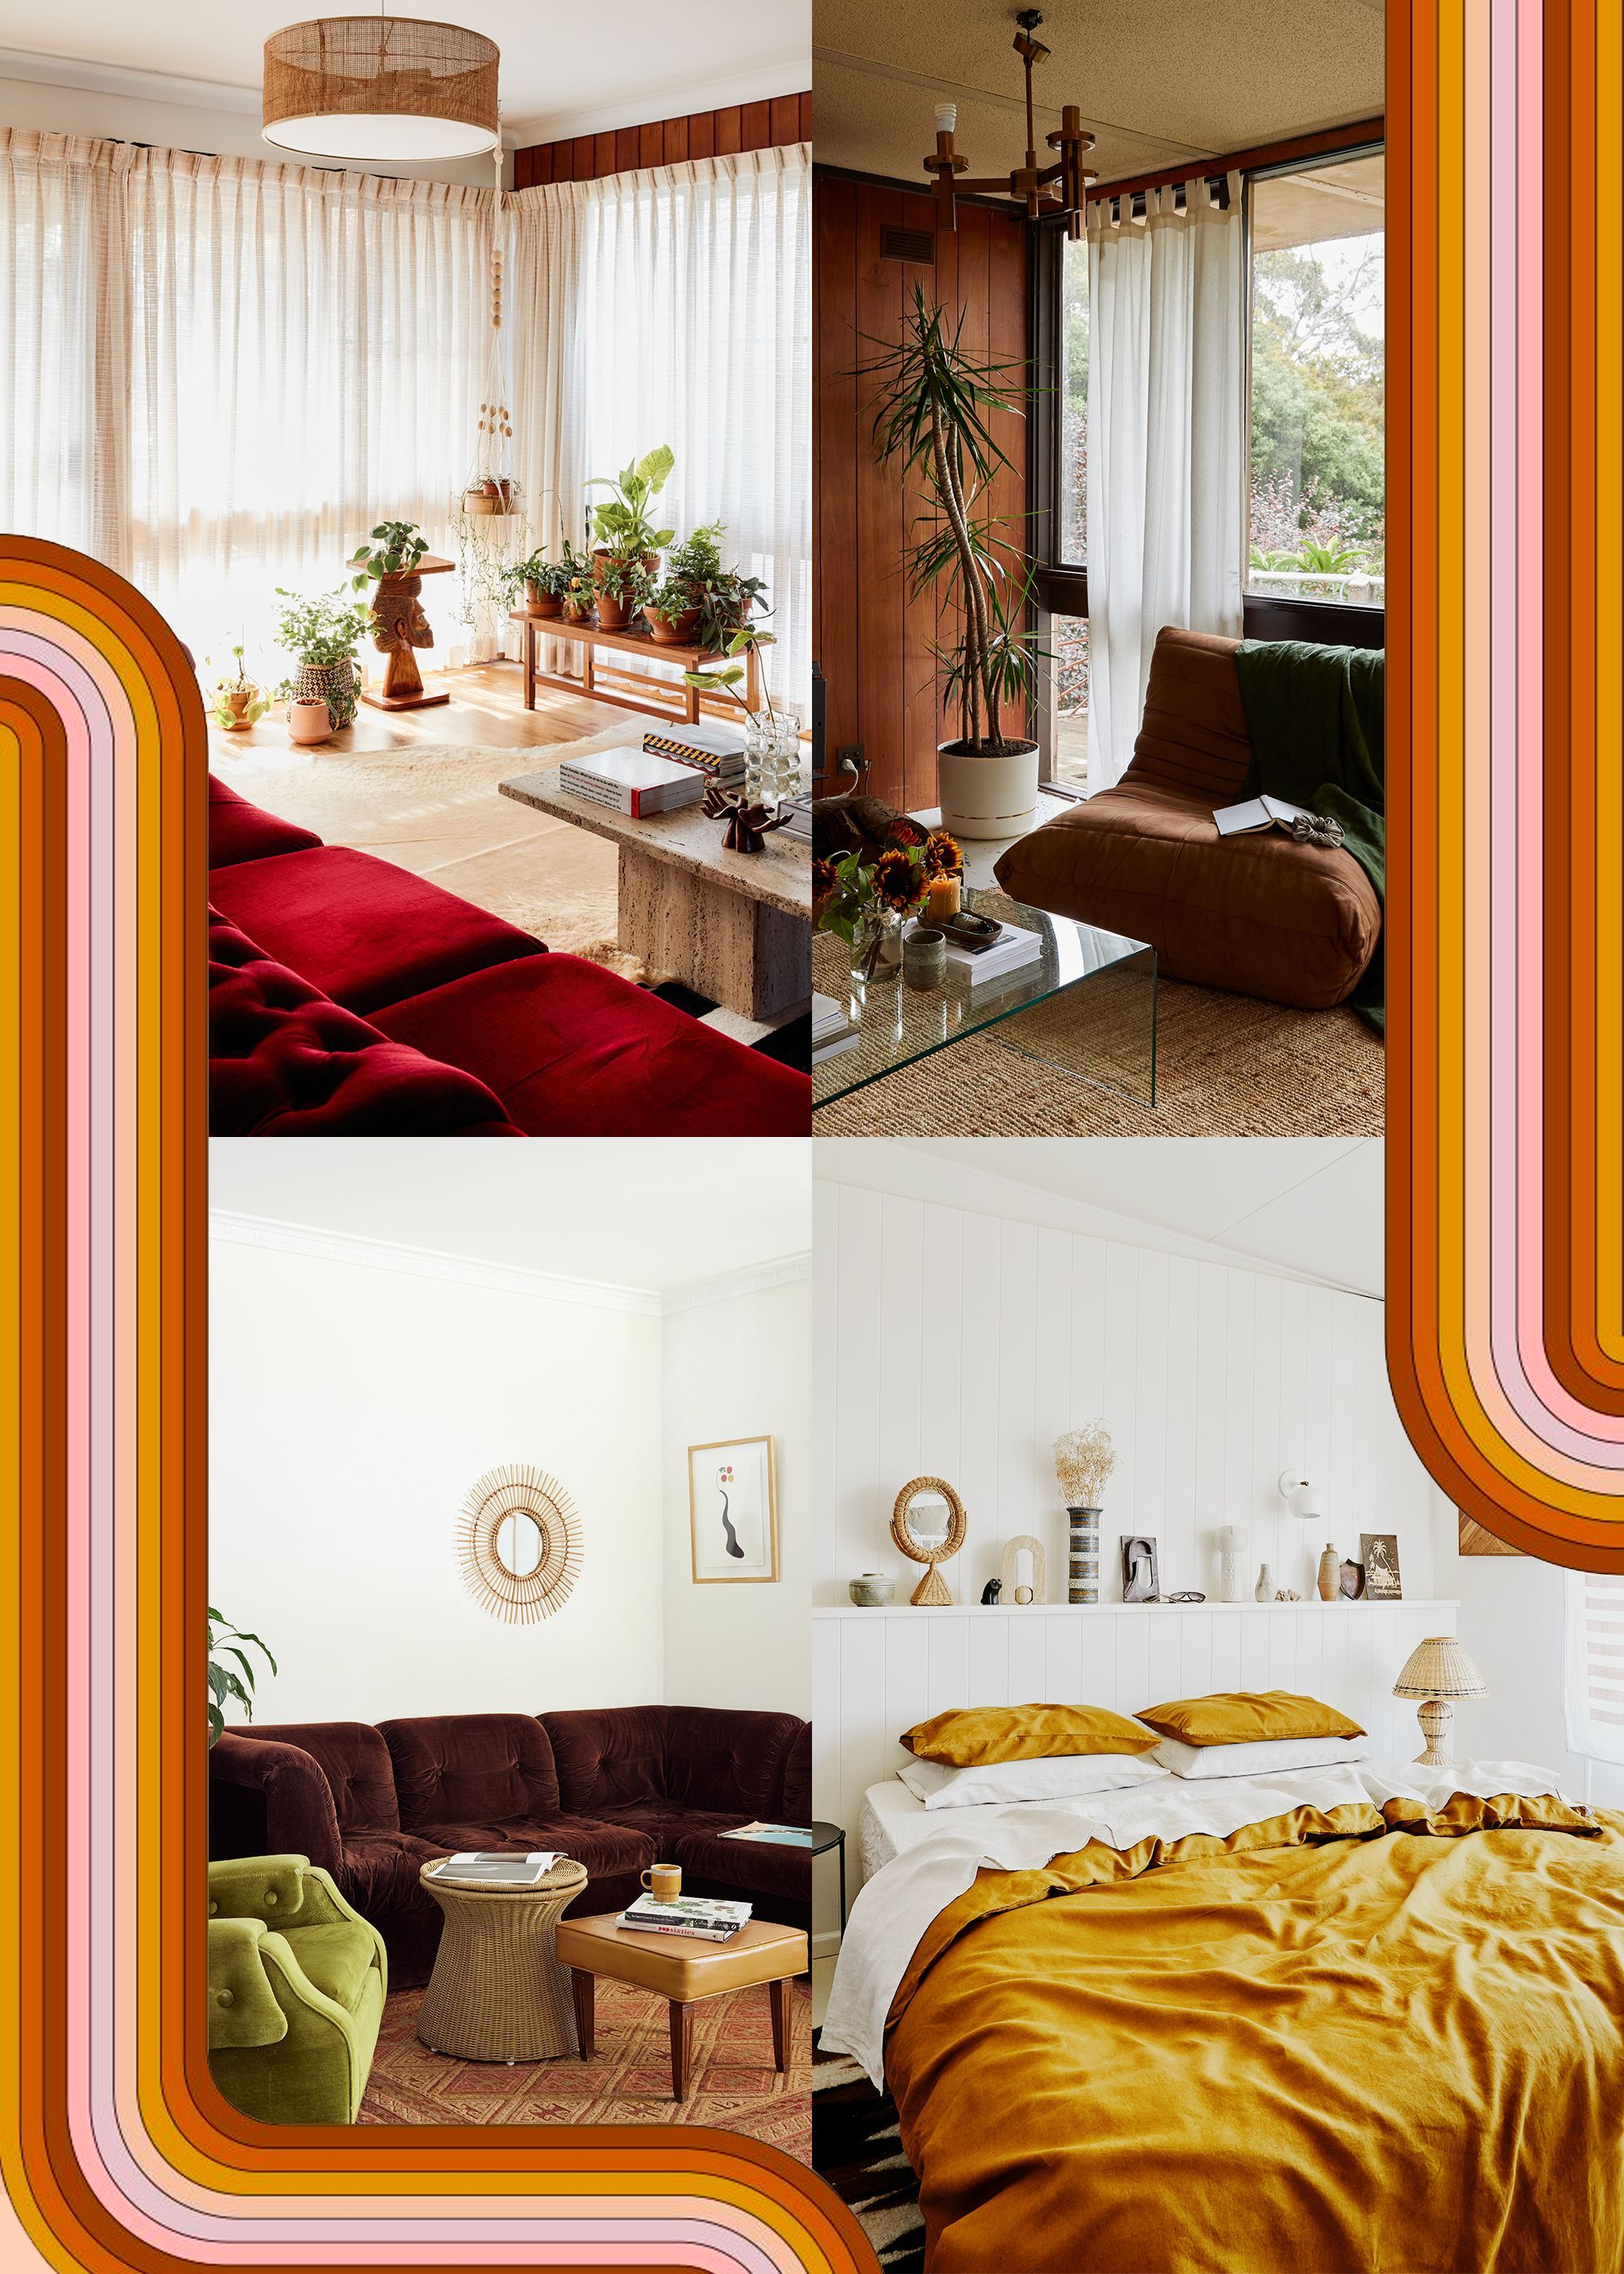 10 Retro-Inspired Homes That Embrace the 1970s Design Trend – Bed ...